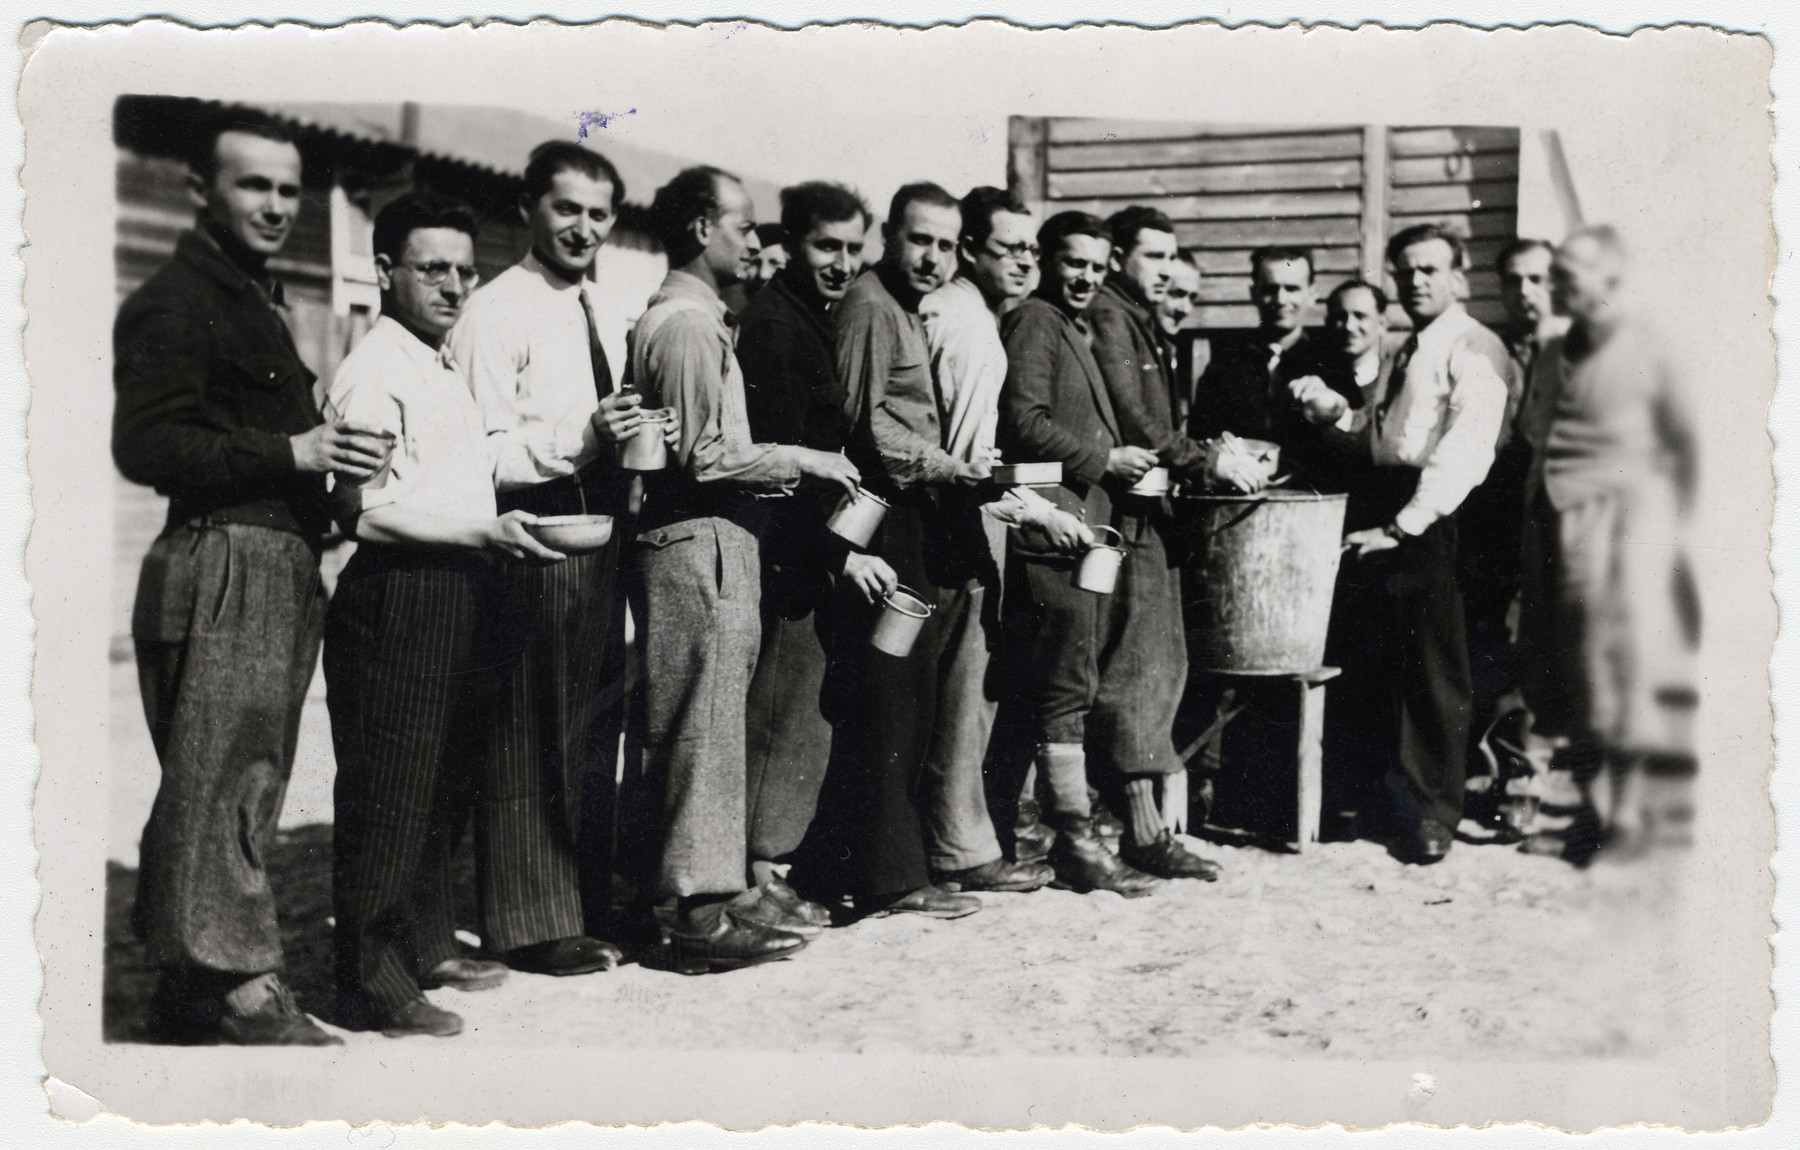 Prisoners wait in line for their rations in the Beaune-la-Rolande transit camp.

The original caption reads "Soup distribution."

Pictured third from left is Chil Jankiel Sztal and fourth from left is Jankiel Michalowicz.